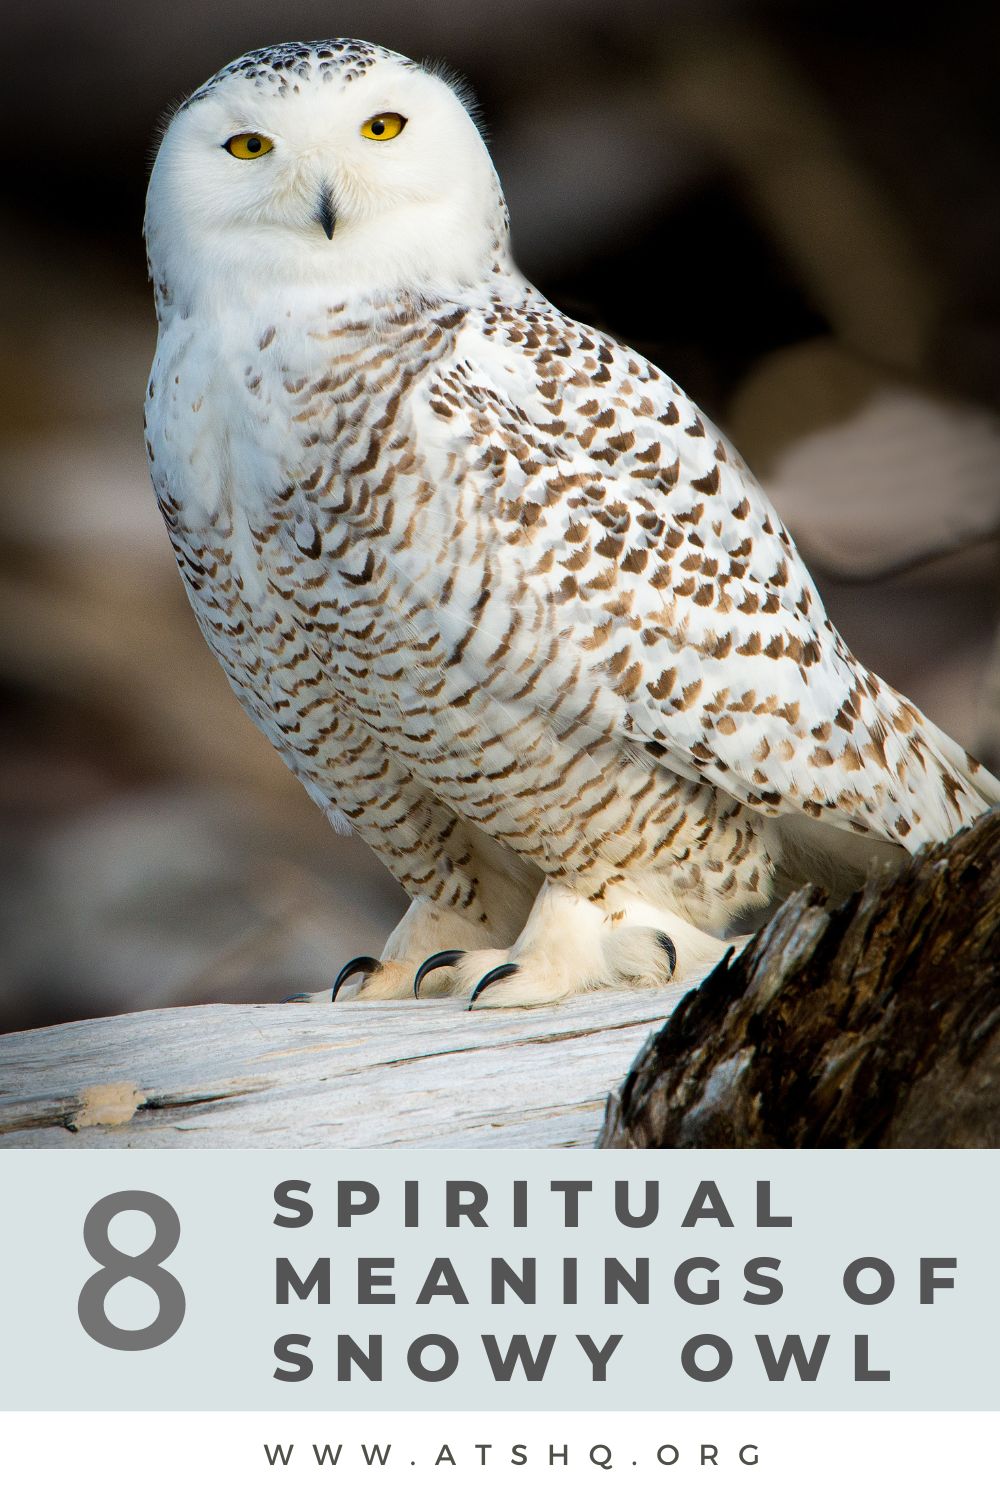 8 Spiritual Meanings of Snowy Owl